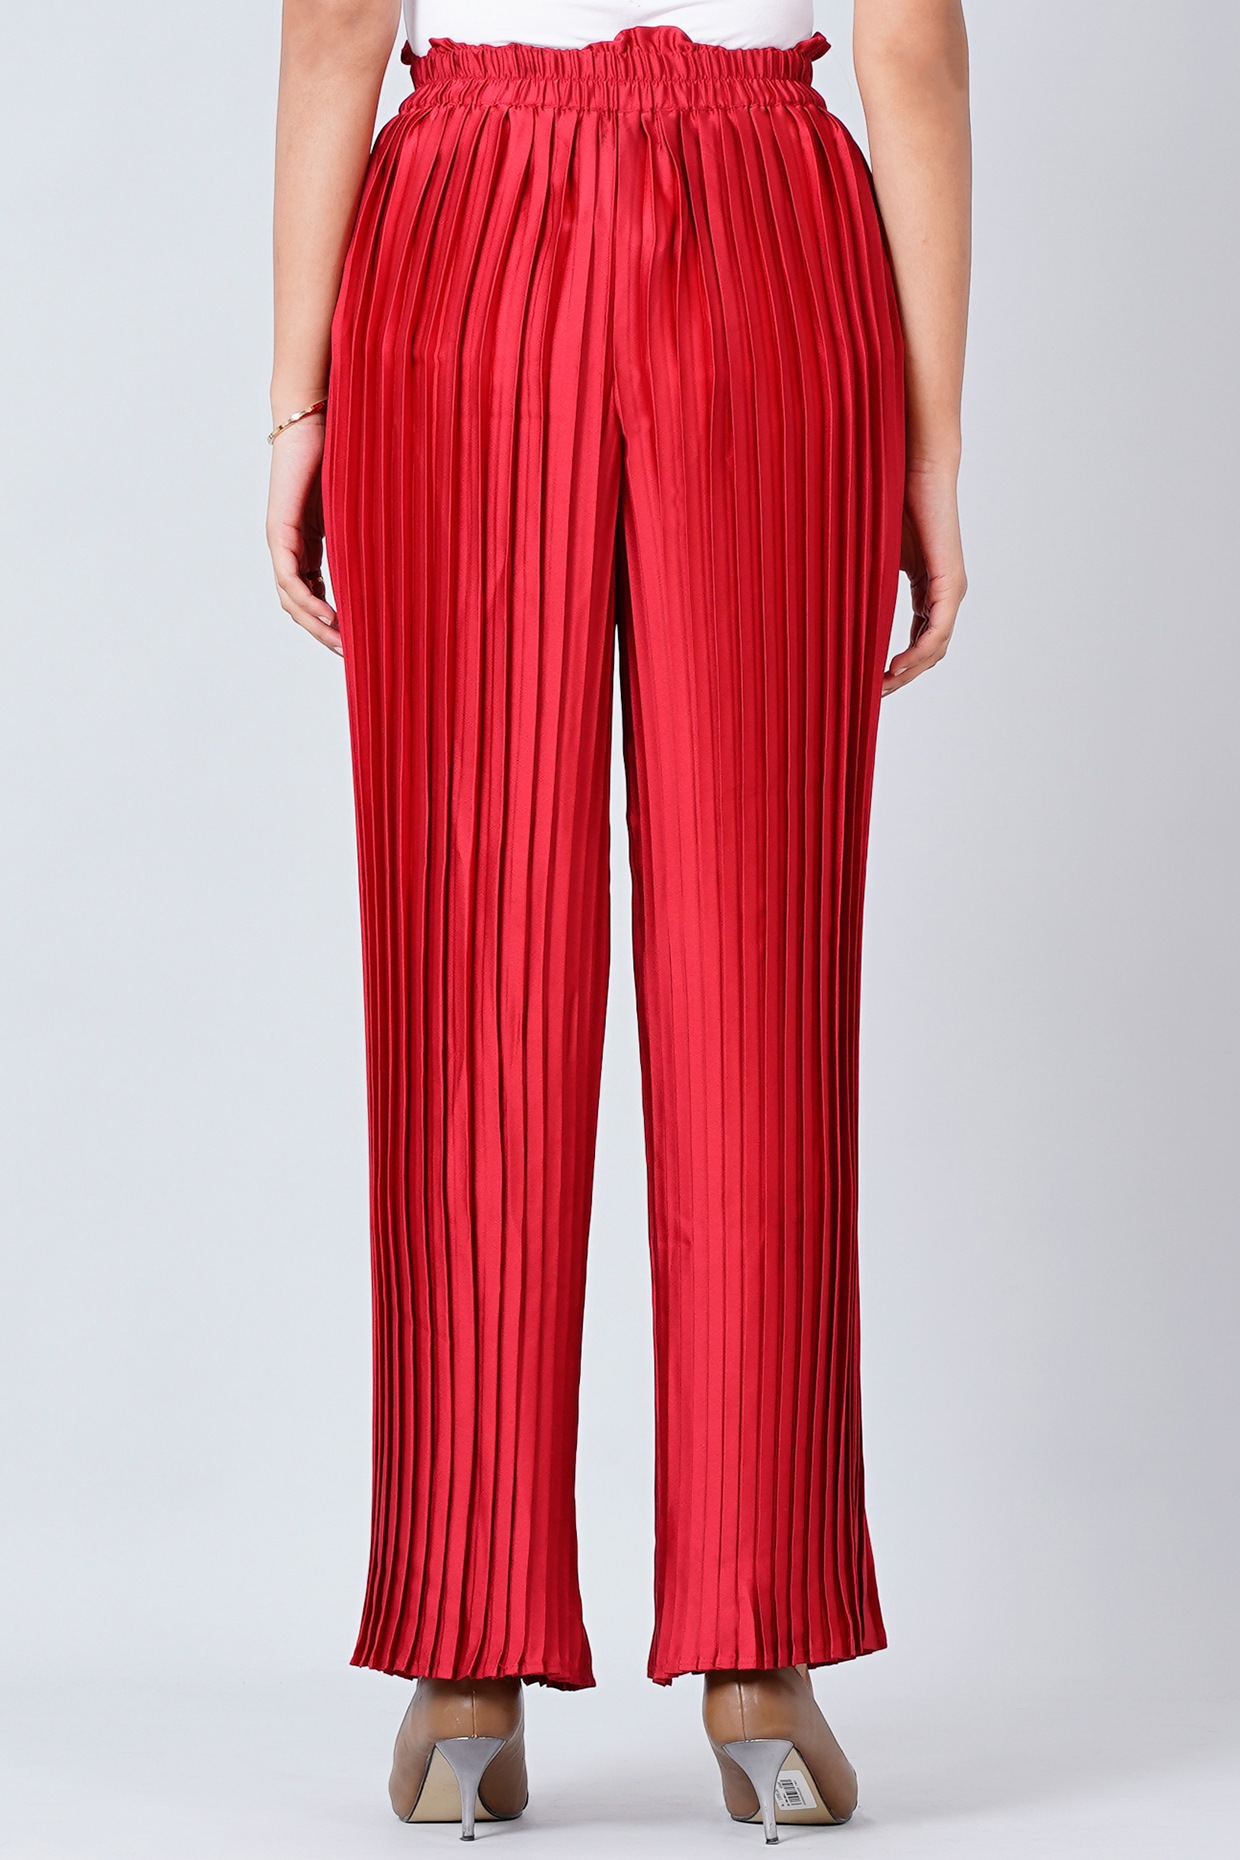 new directions | Palazzo Pants | New Directions Womens Multicolor Polyester  High Rise Pull On Palazzo Pants S | Poshmark